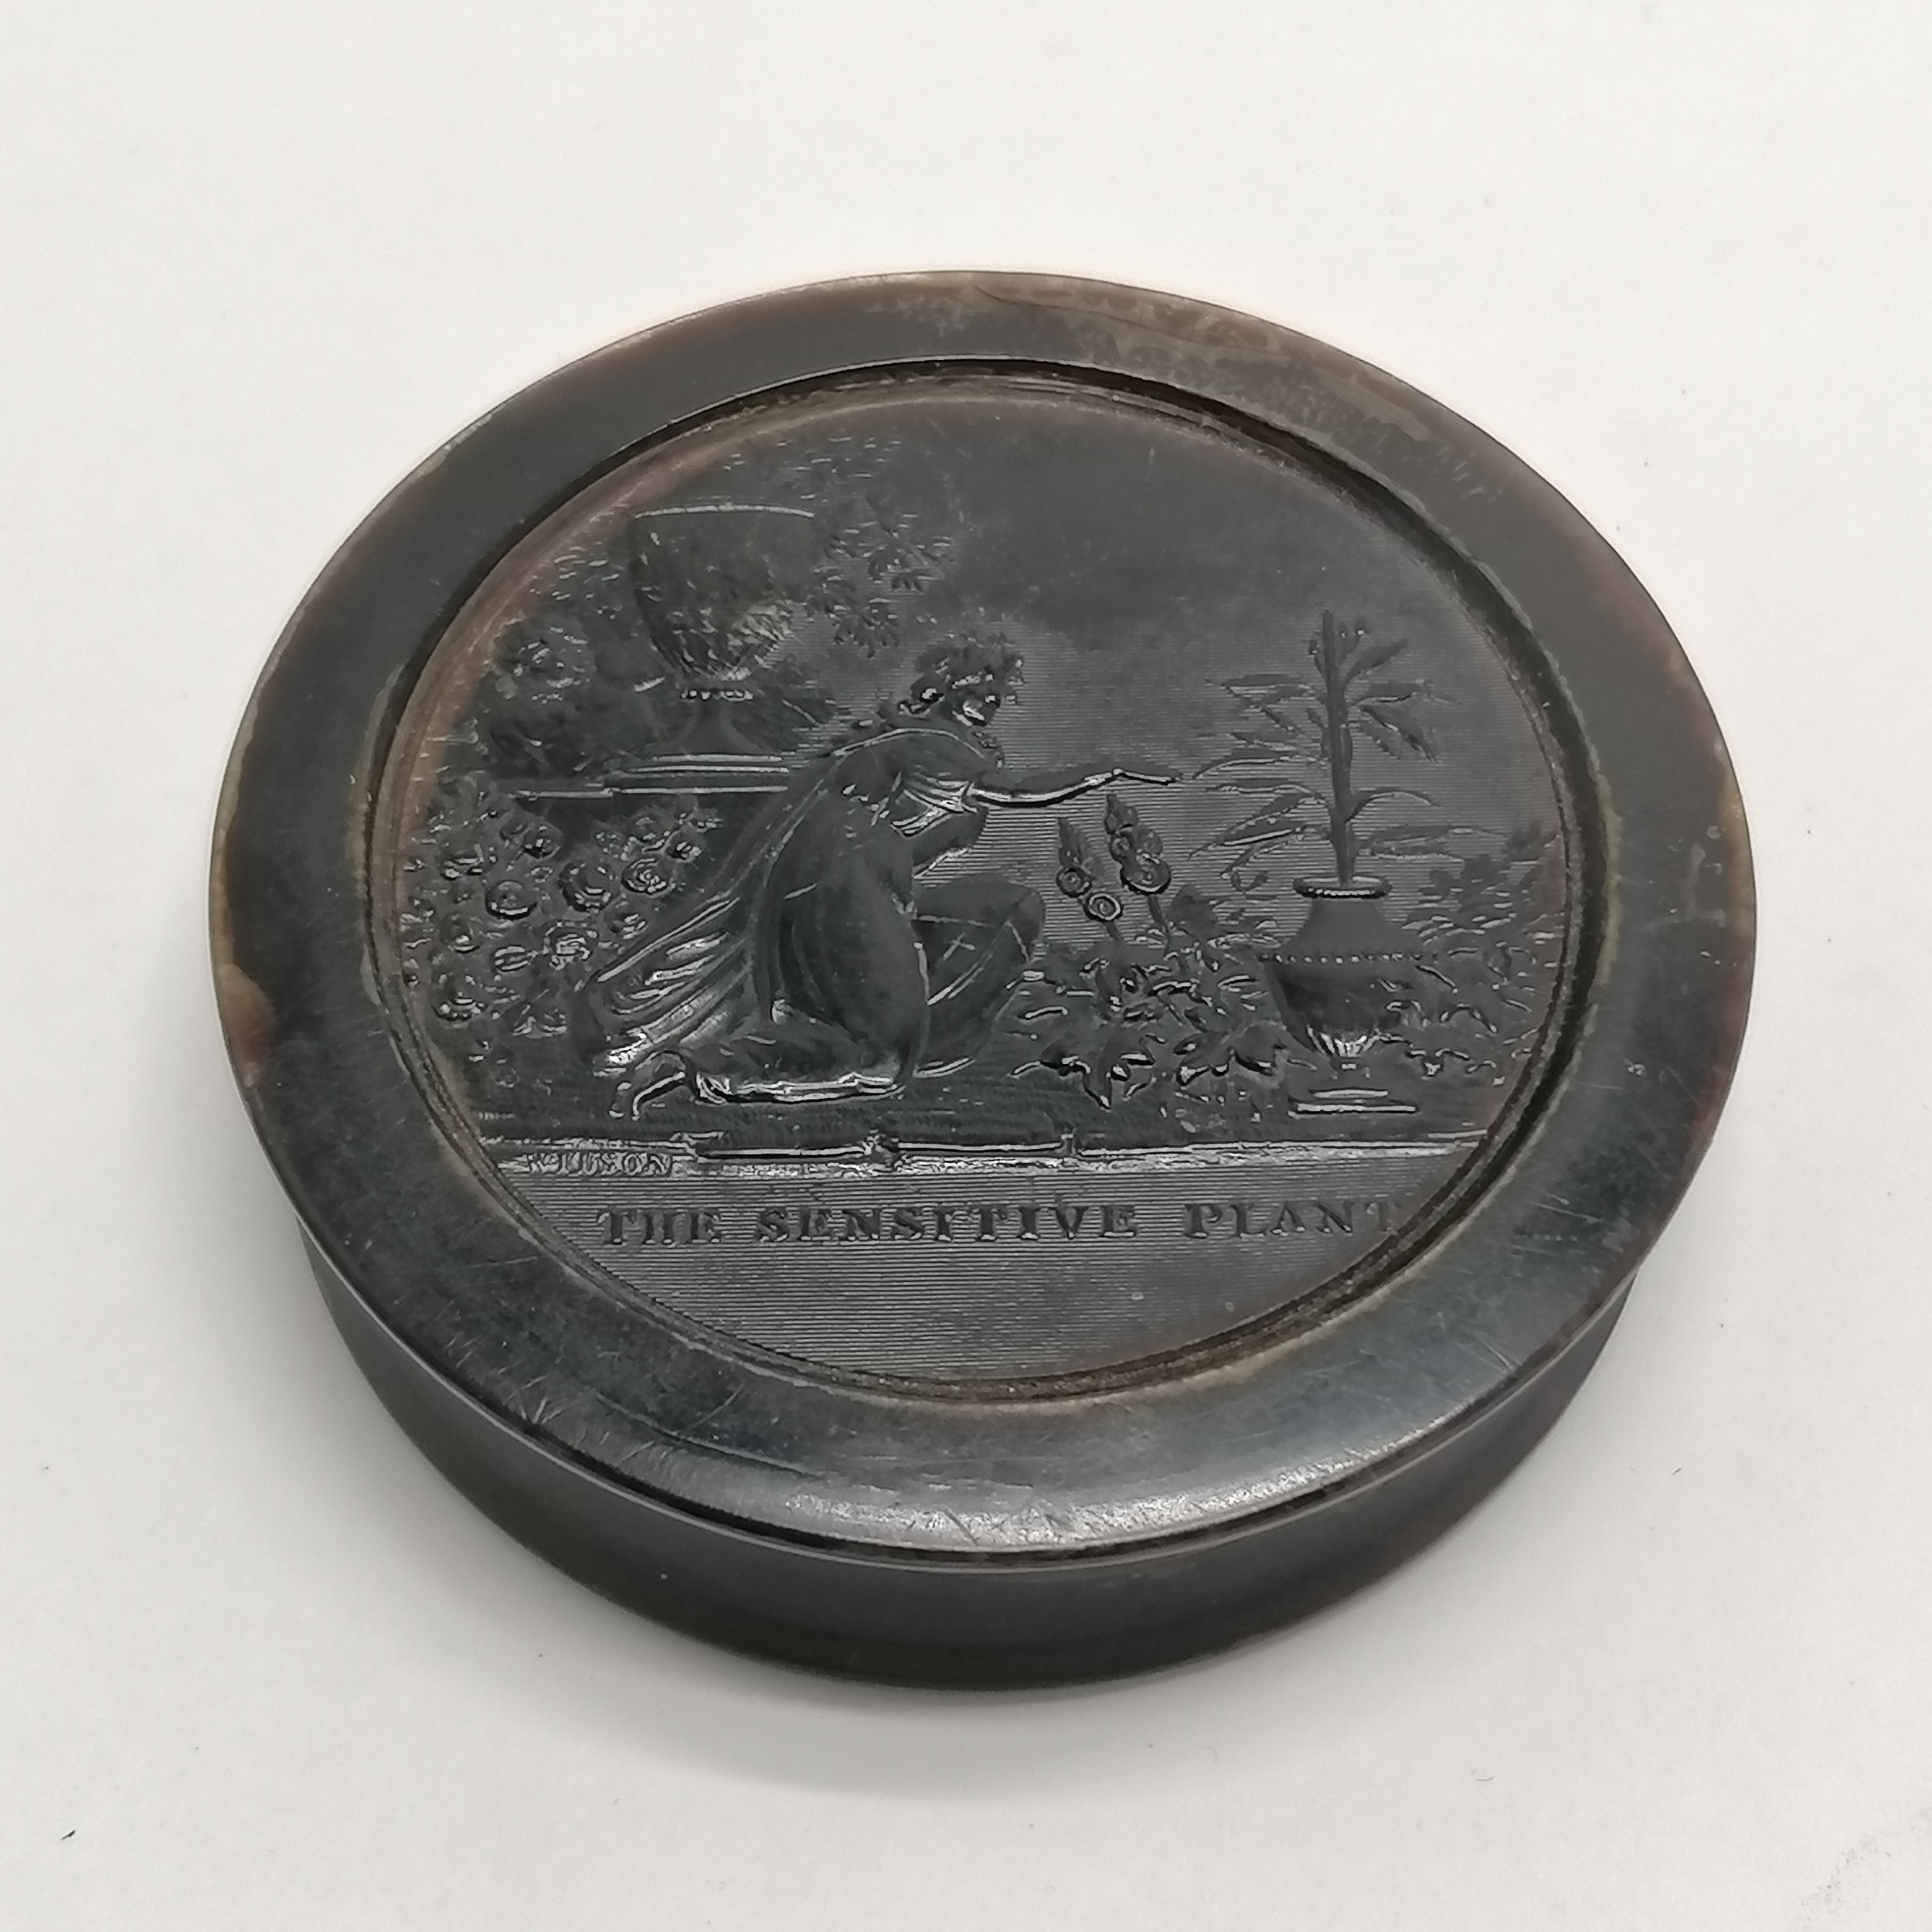 Antique pressed horn / tortoiseshell ? table snuff box by Wilson with classical scene to lid 'The